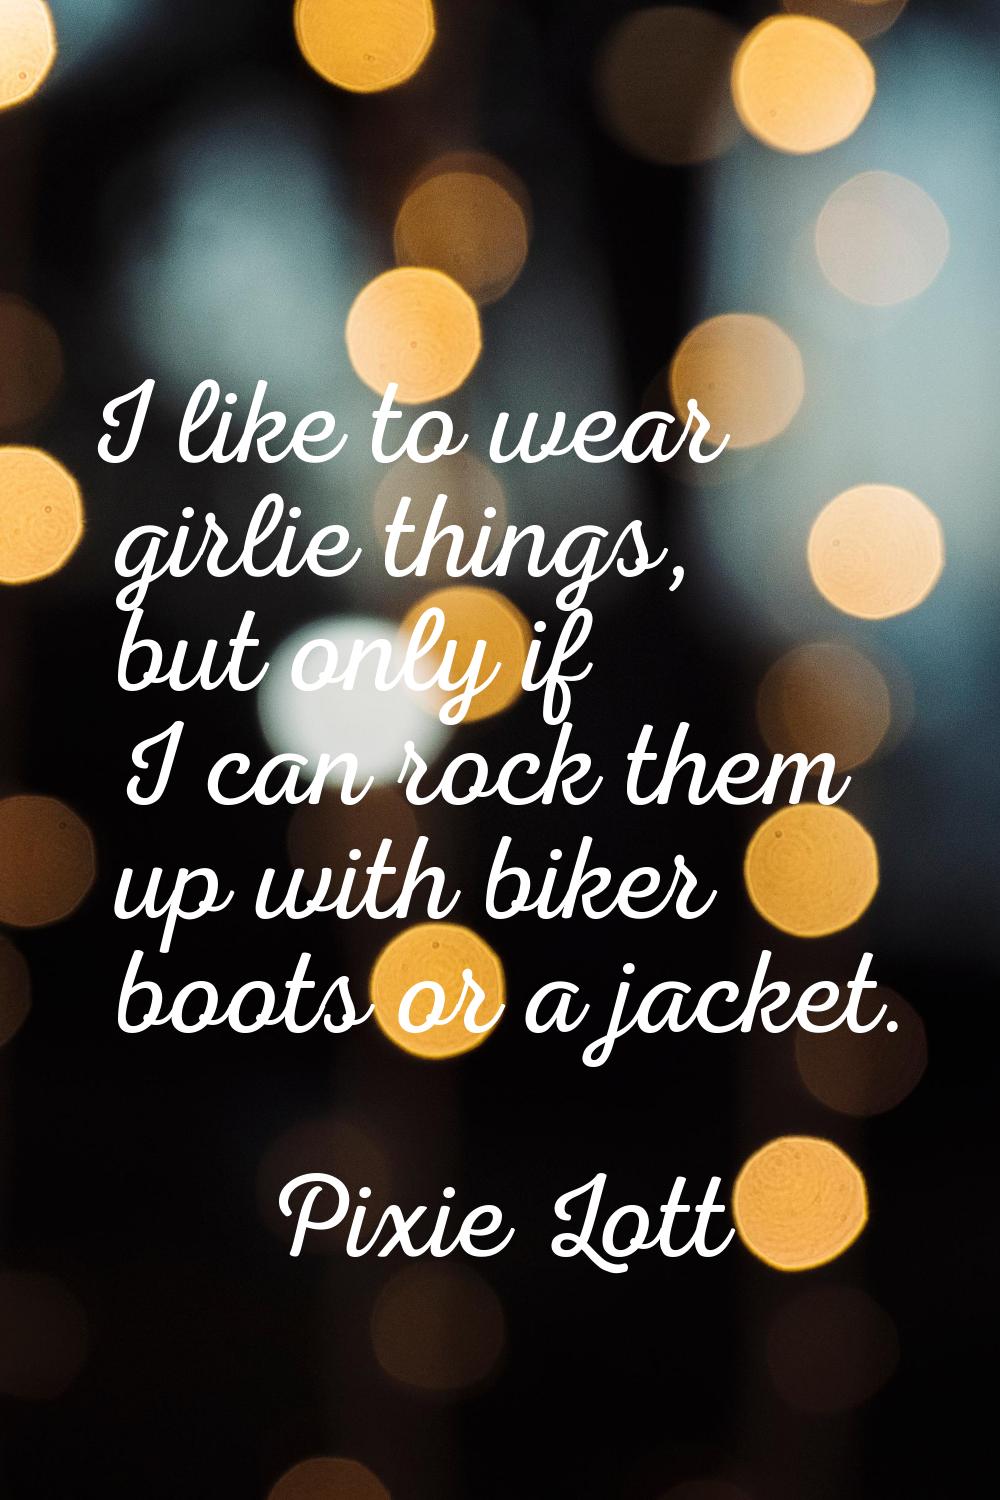 I like to wear girlie things, but only if I can rock them up with biker boots or a jacket.